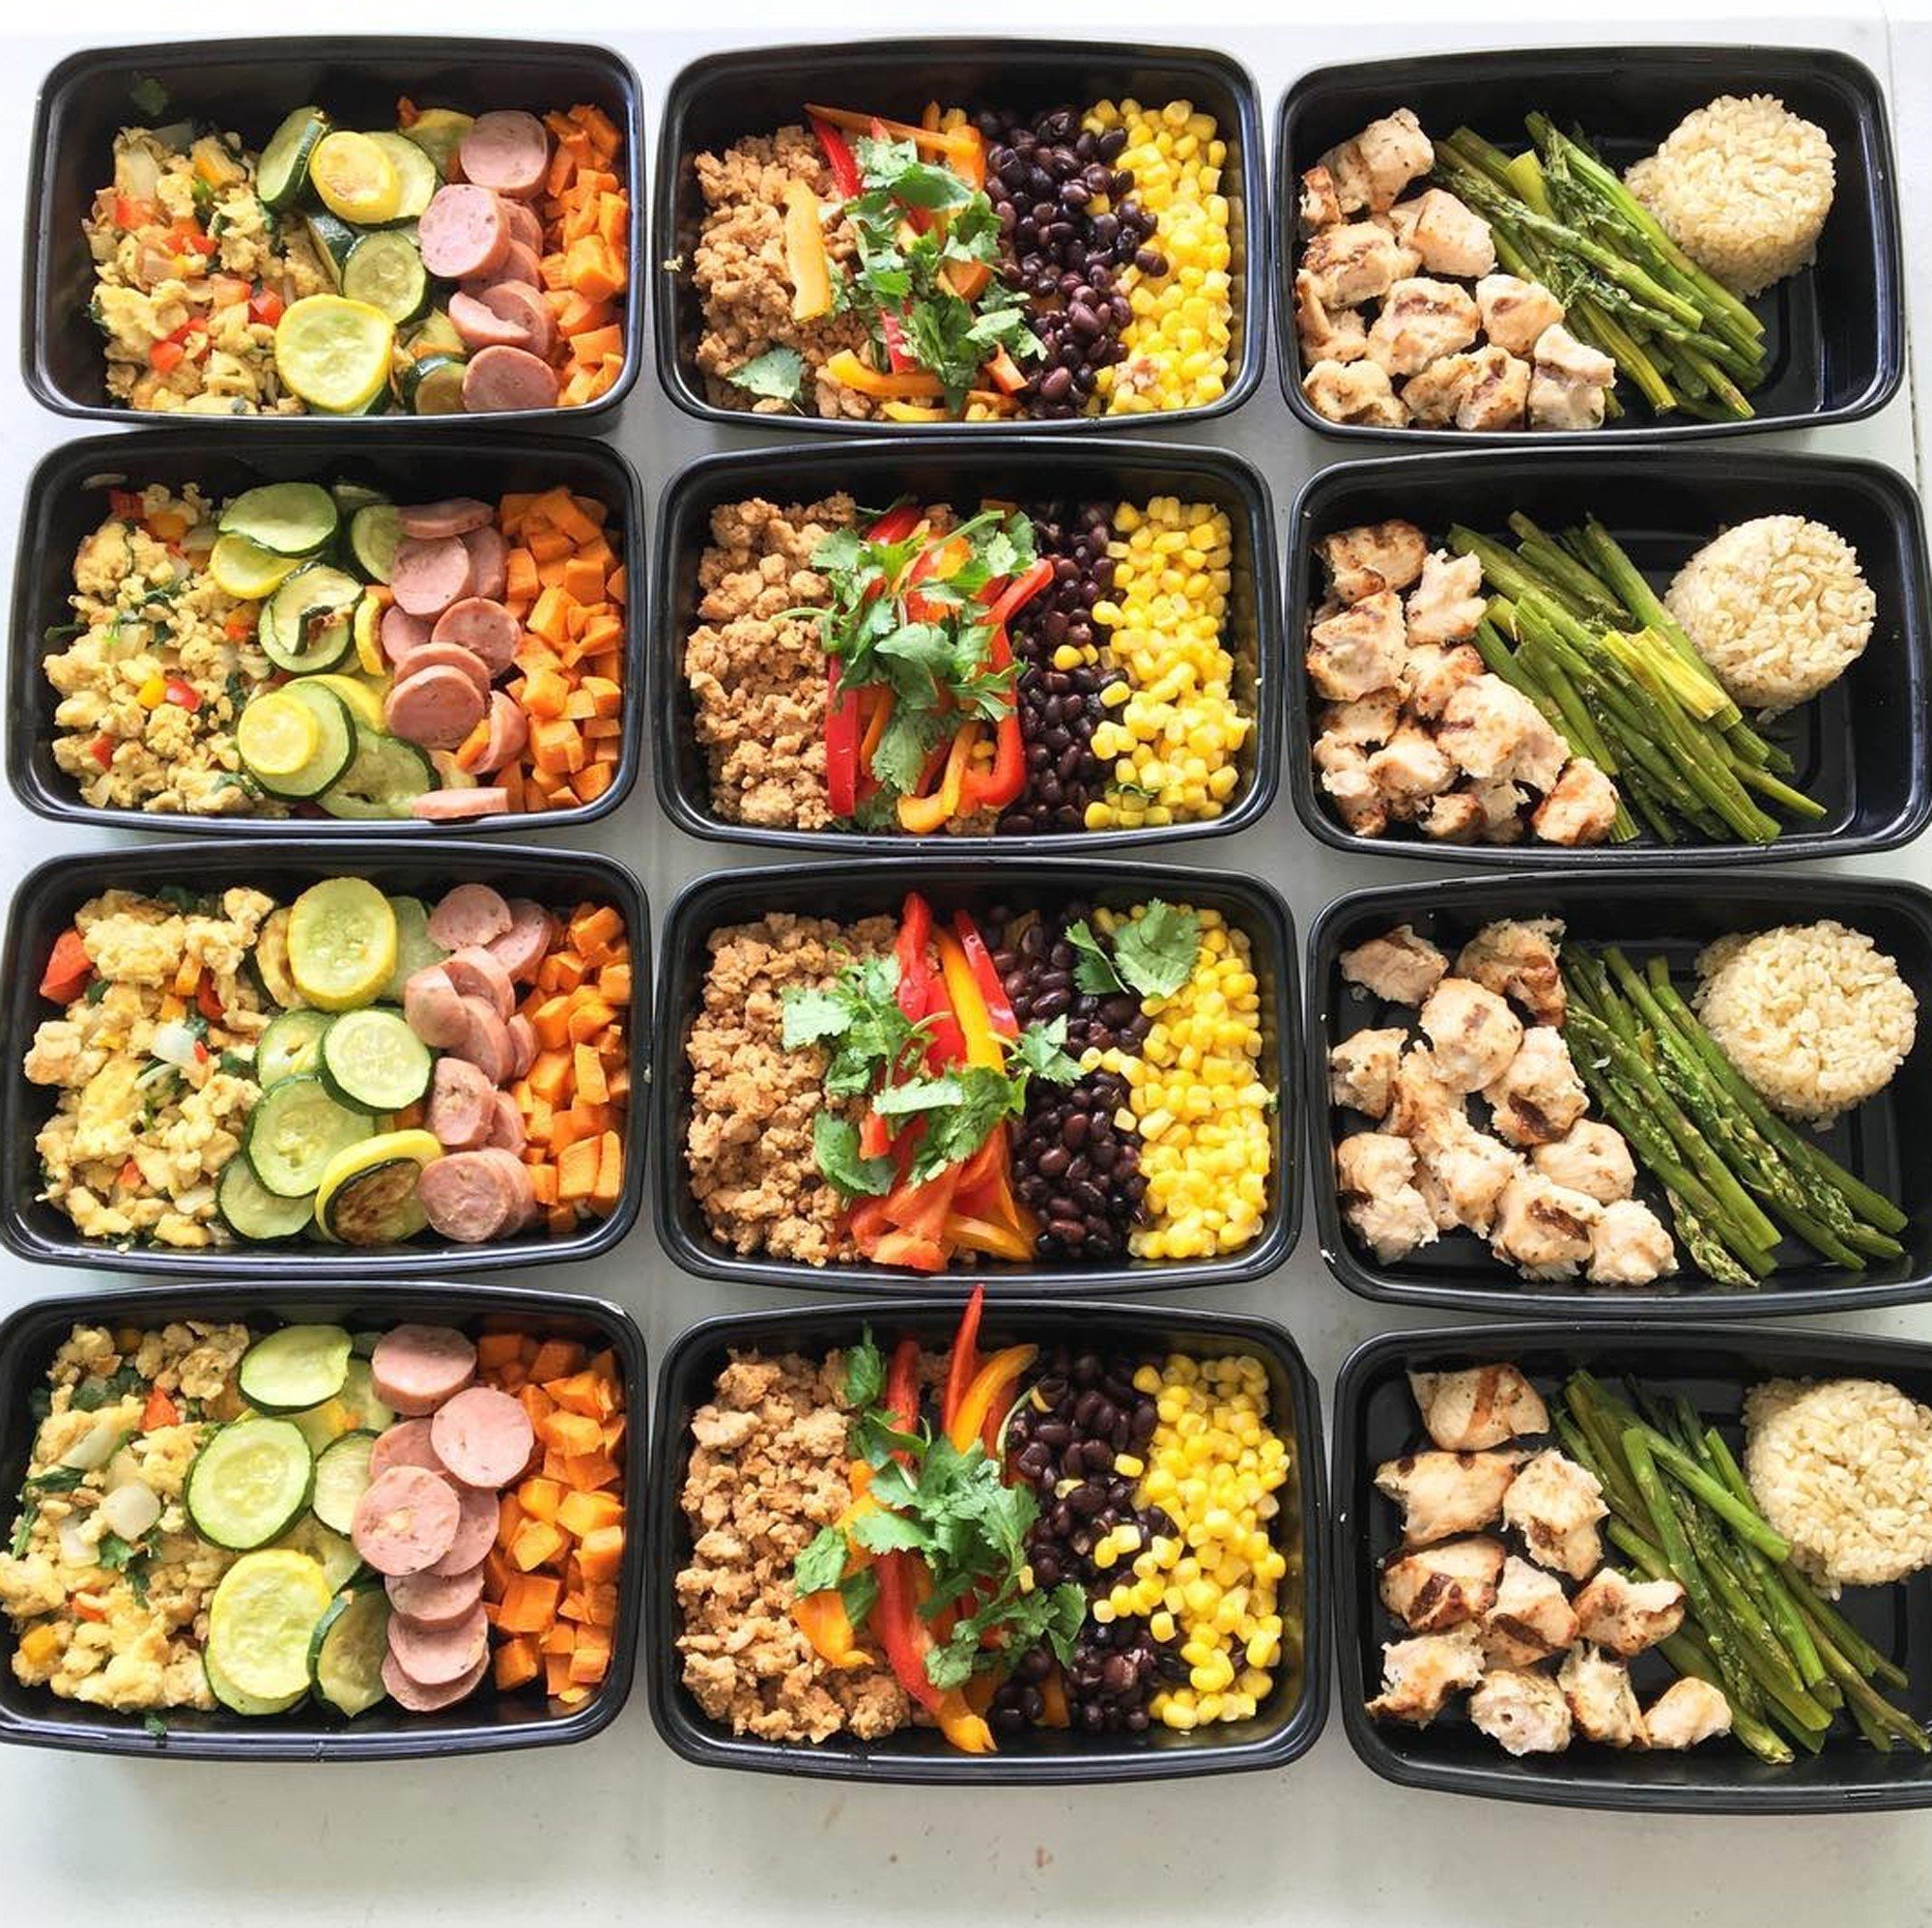 Meal Prep Like a Pro: Efficient Cooking for the Week